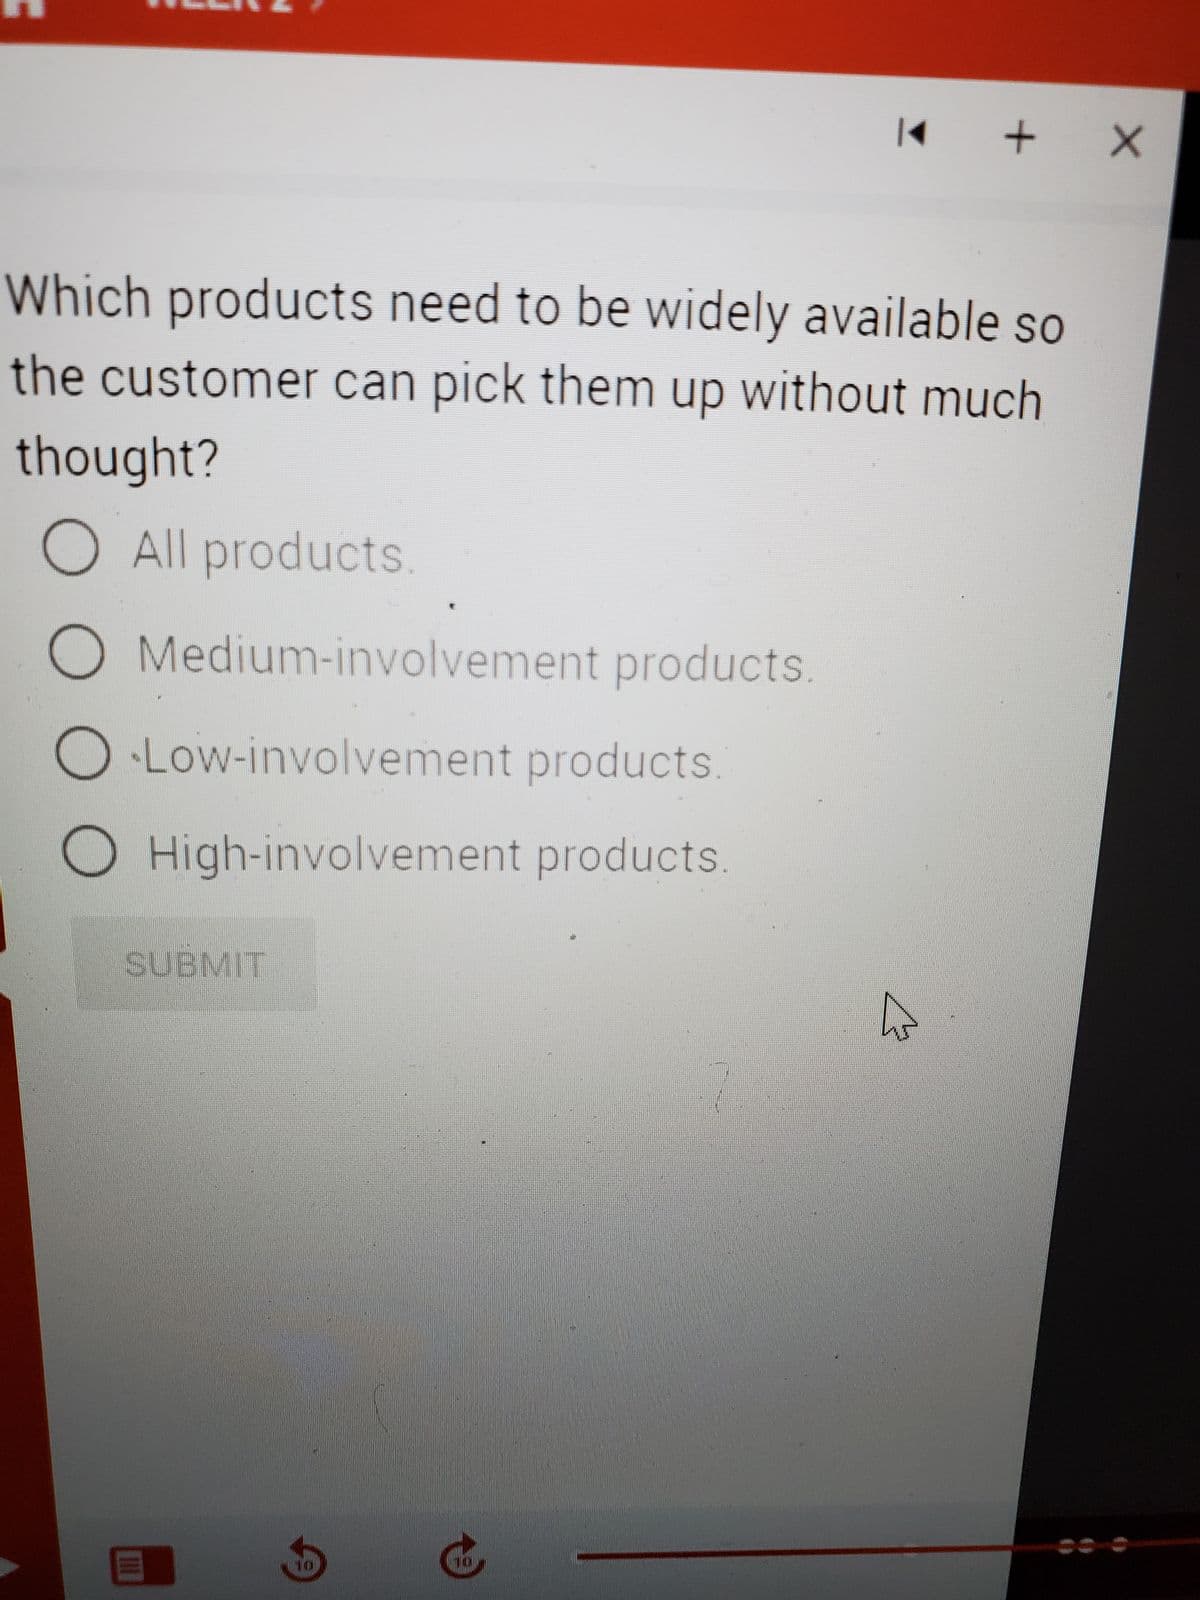 O Medium-involvement products.
O Low-involvement products.
O High-involvement products.
Which products need to be widely available so
the customer can pick them up without much
thought?
O All products.
SUBMIT
|◄
III
+ X